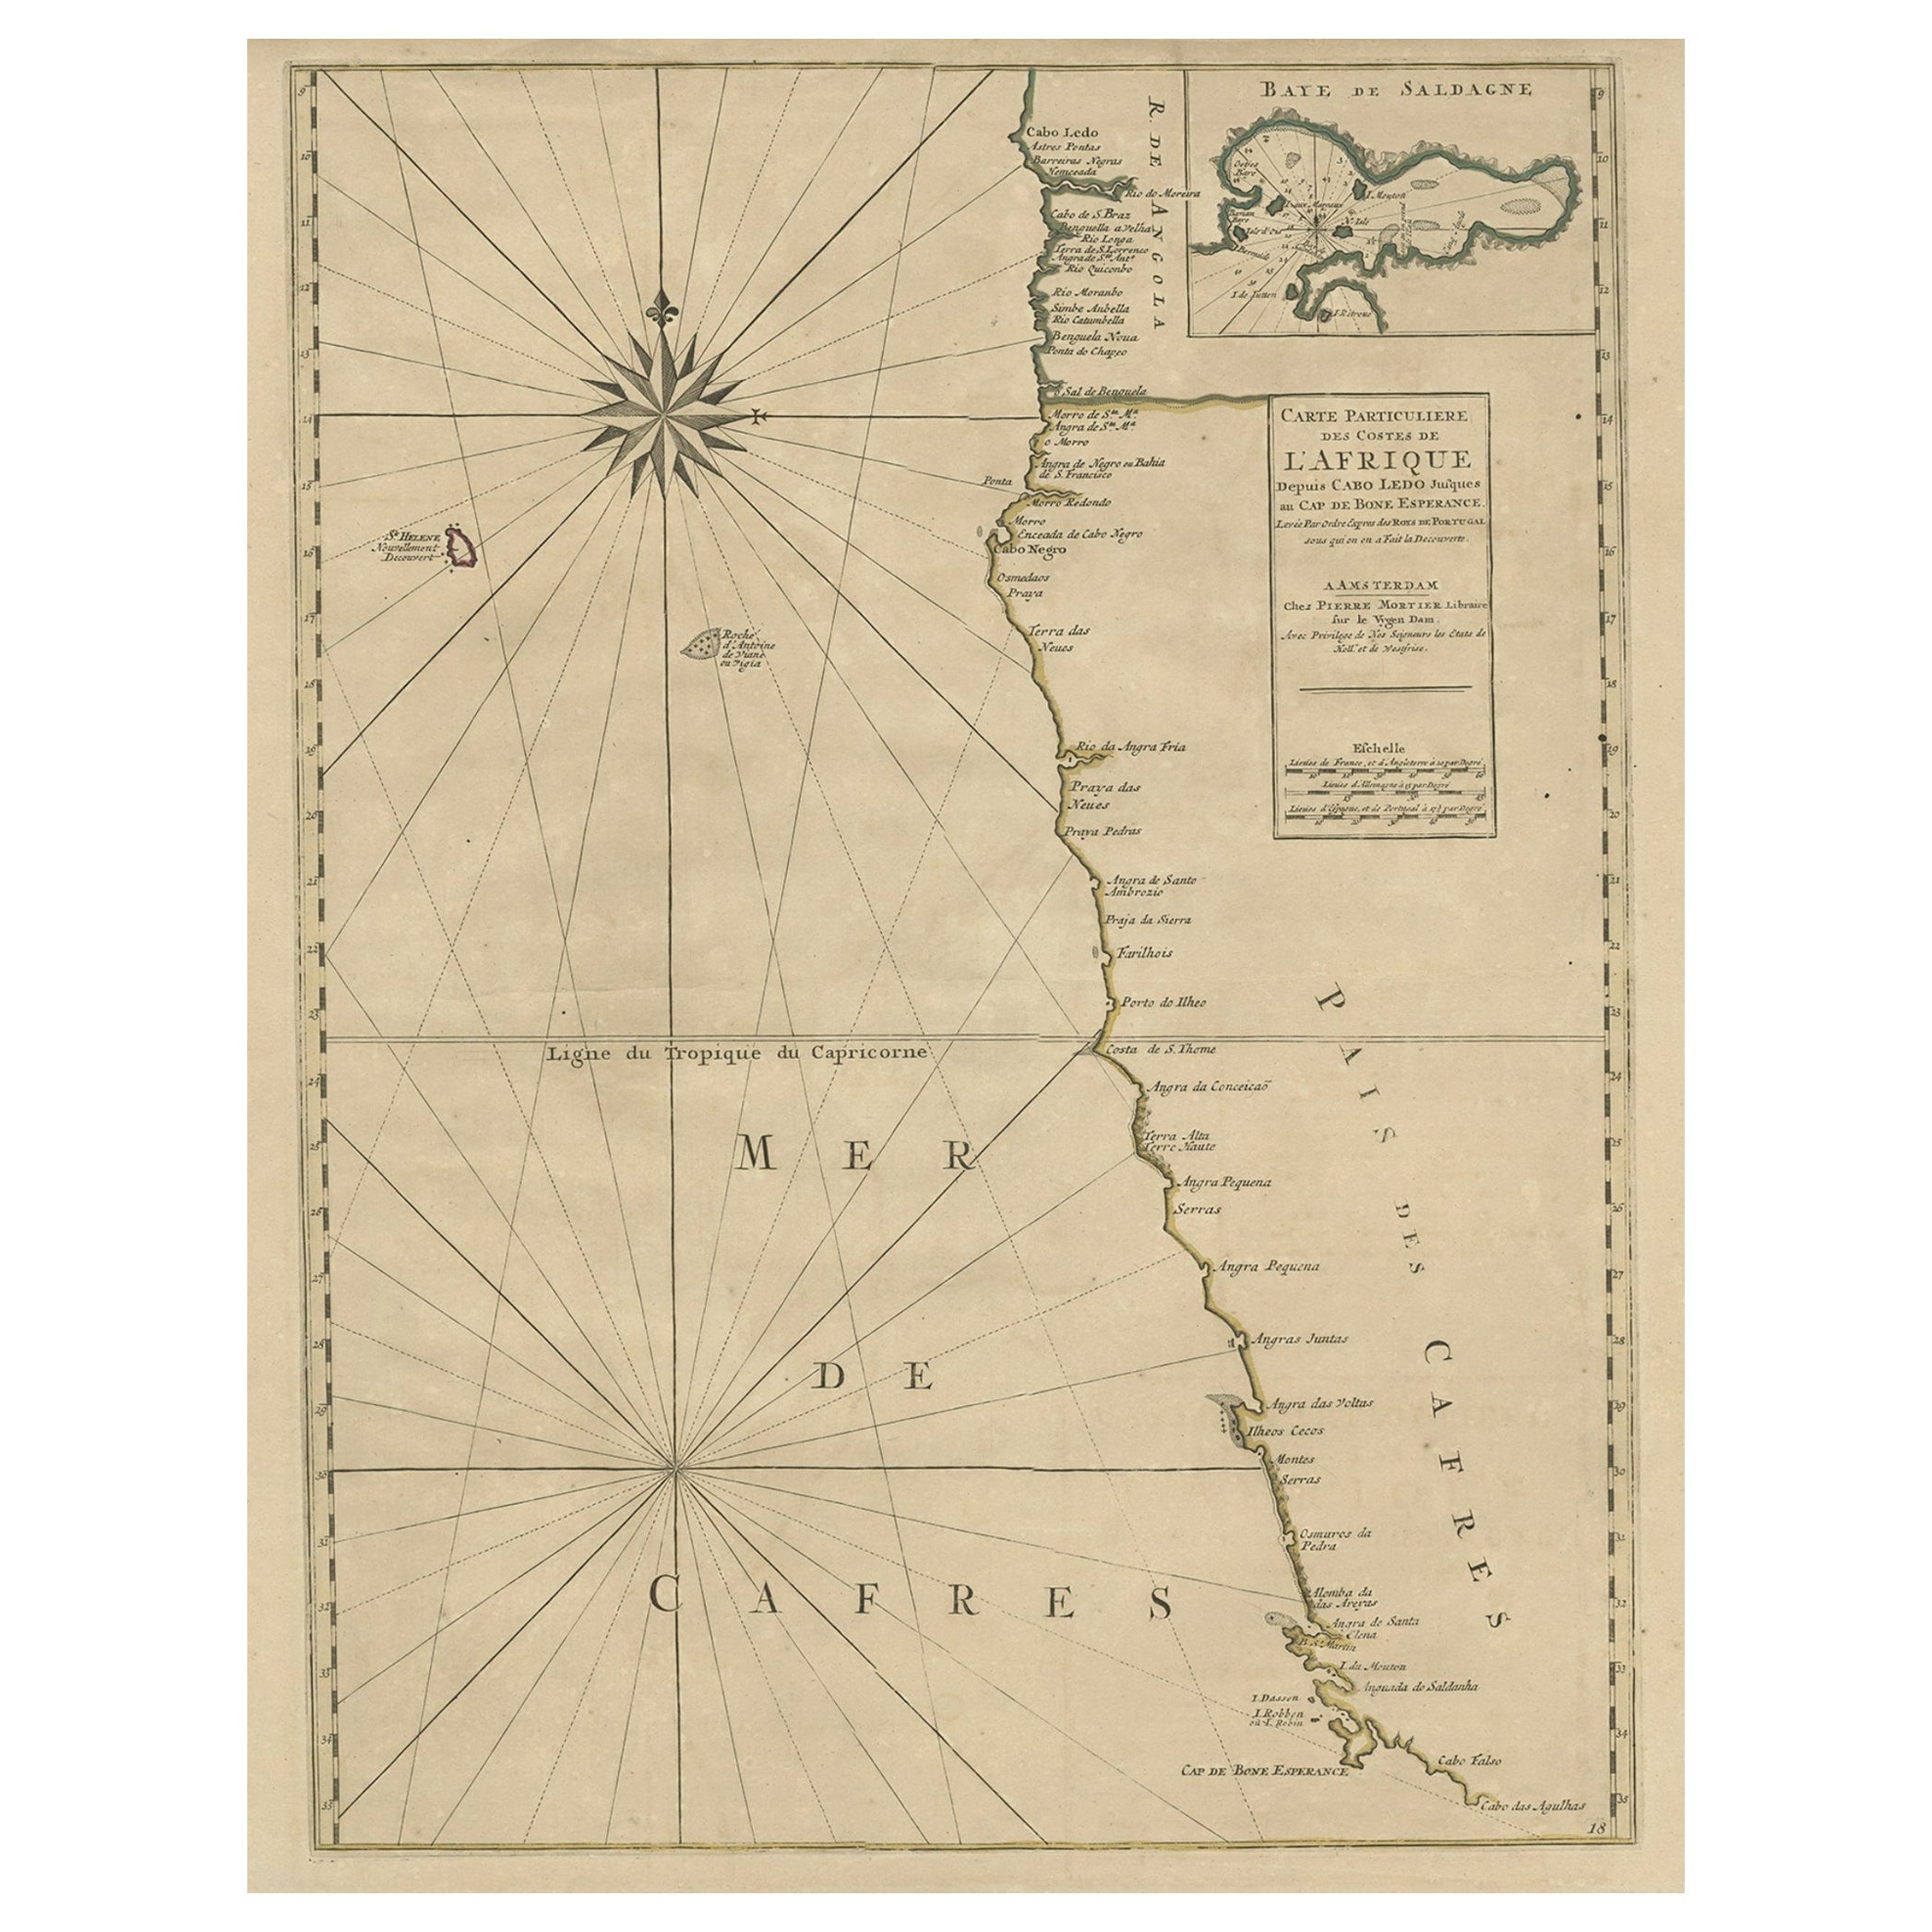 Old Map of the Namibia and South Africa Coasts & Inset of Saldanha Bay, ca.1700 For Sale